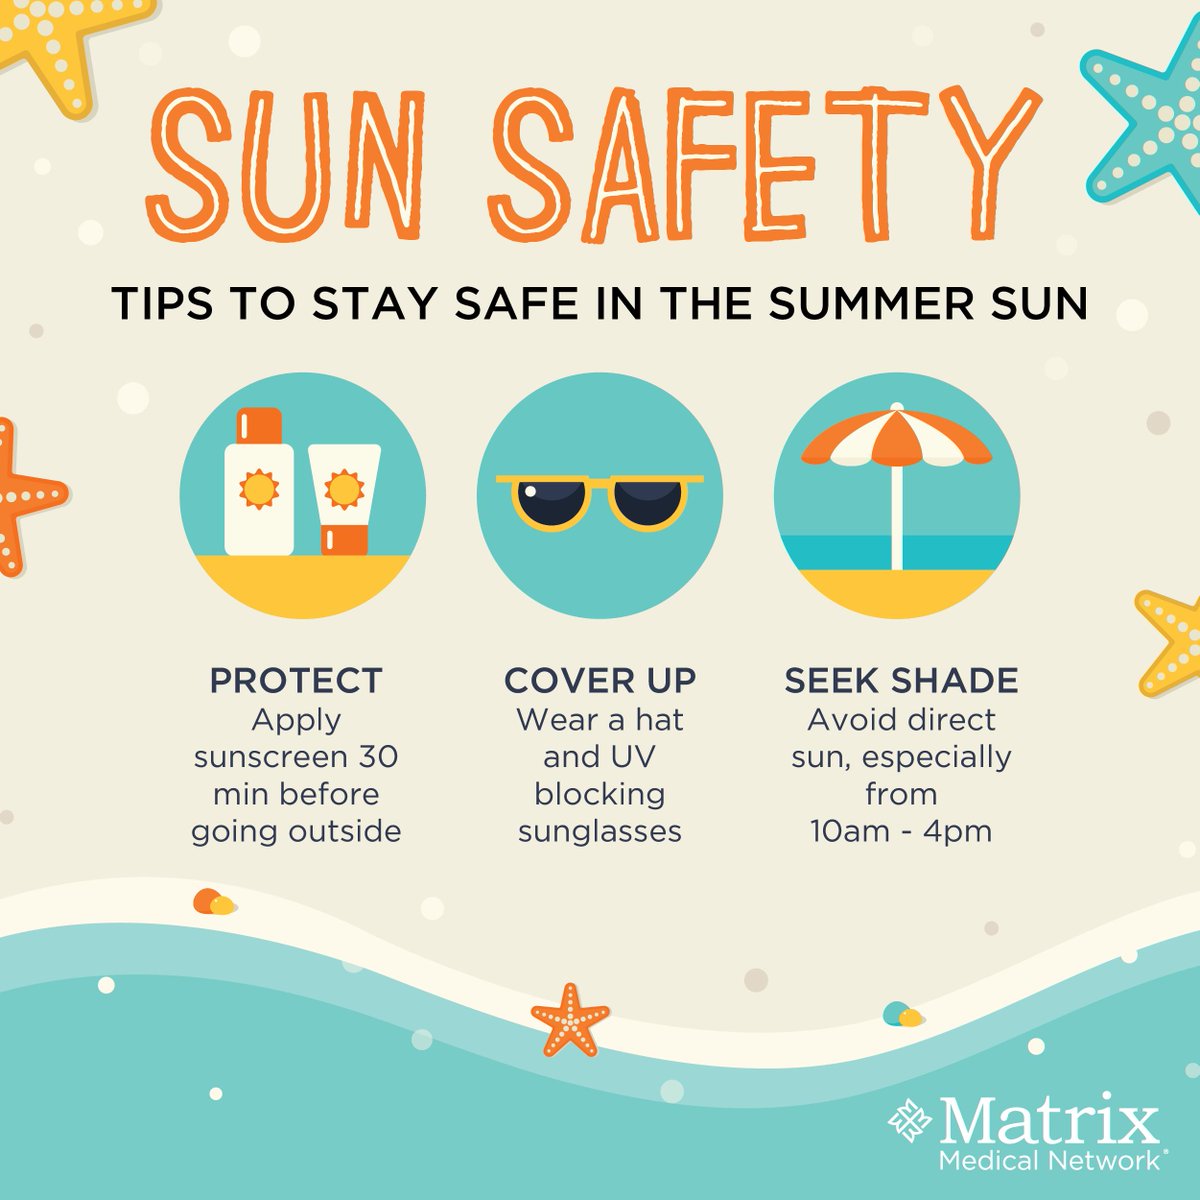 Today is #DontFryDay, which reminds us to avoid #sun overexposure. Follow these tips to stay safe in the sun! #sunsafety #sunexposure